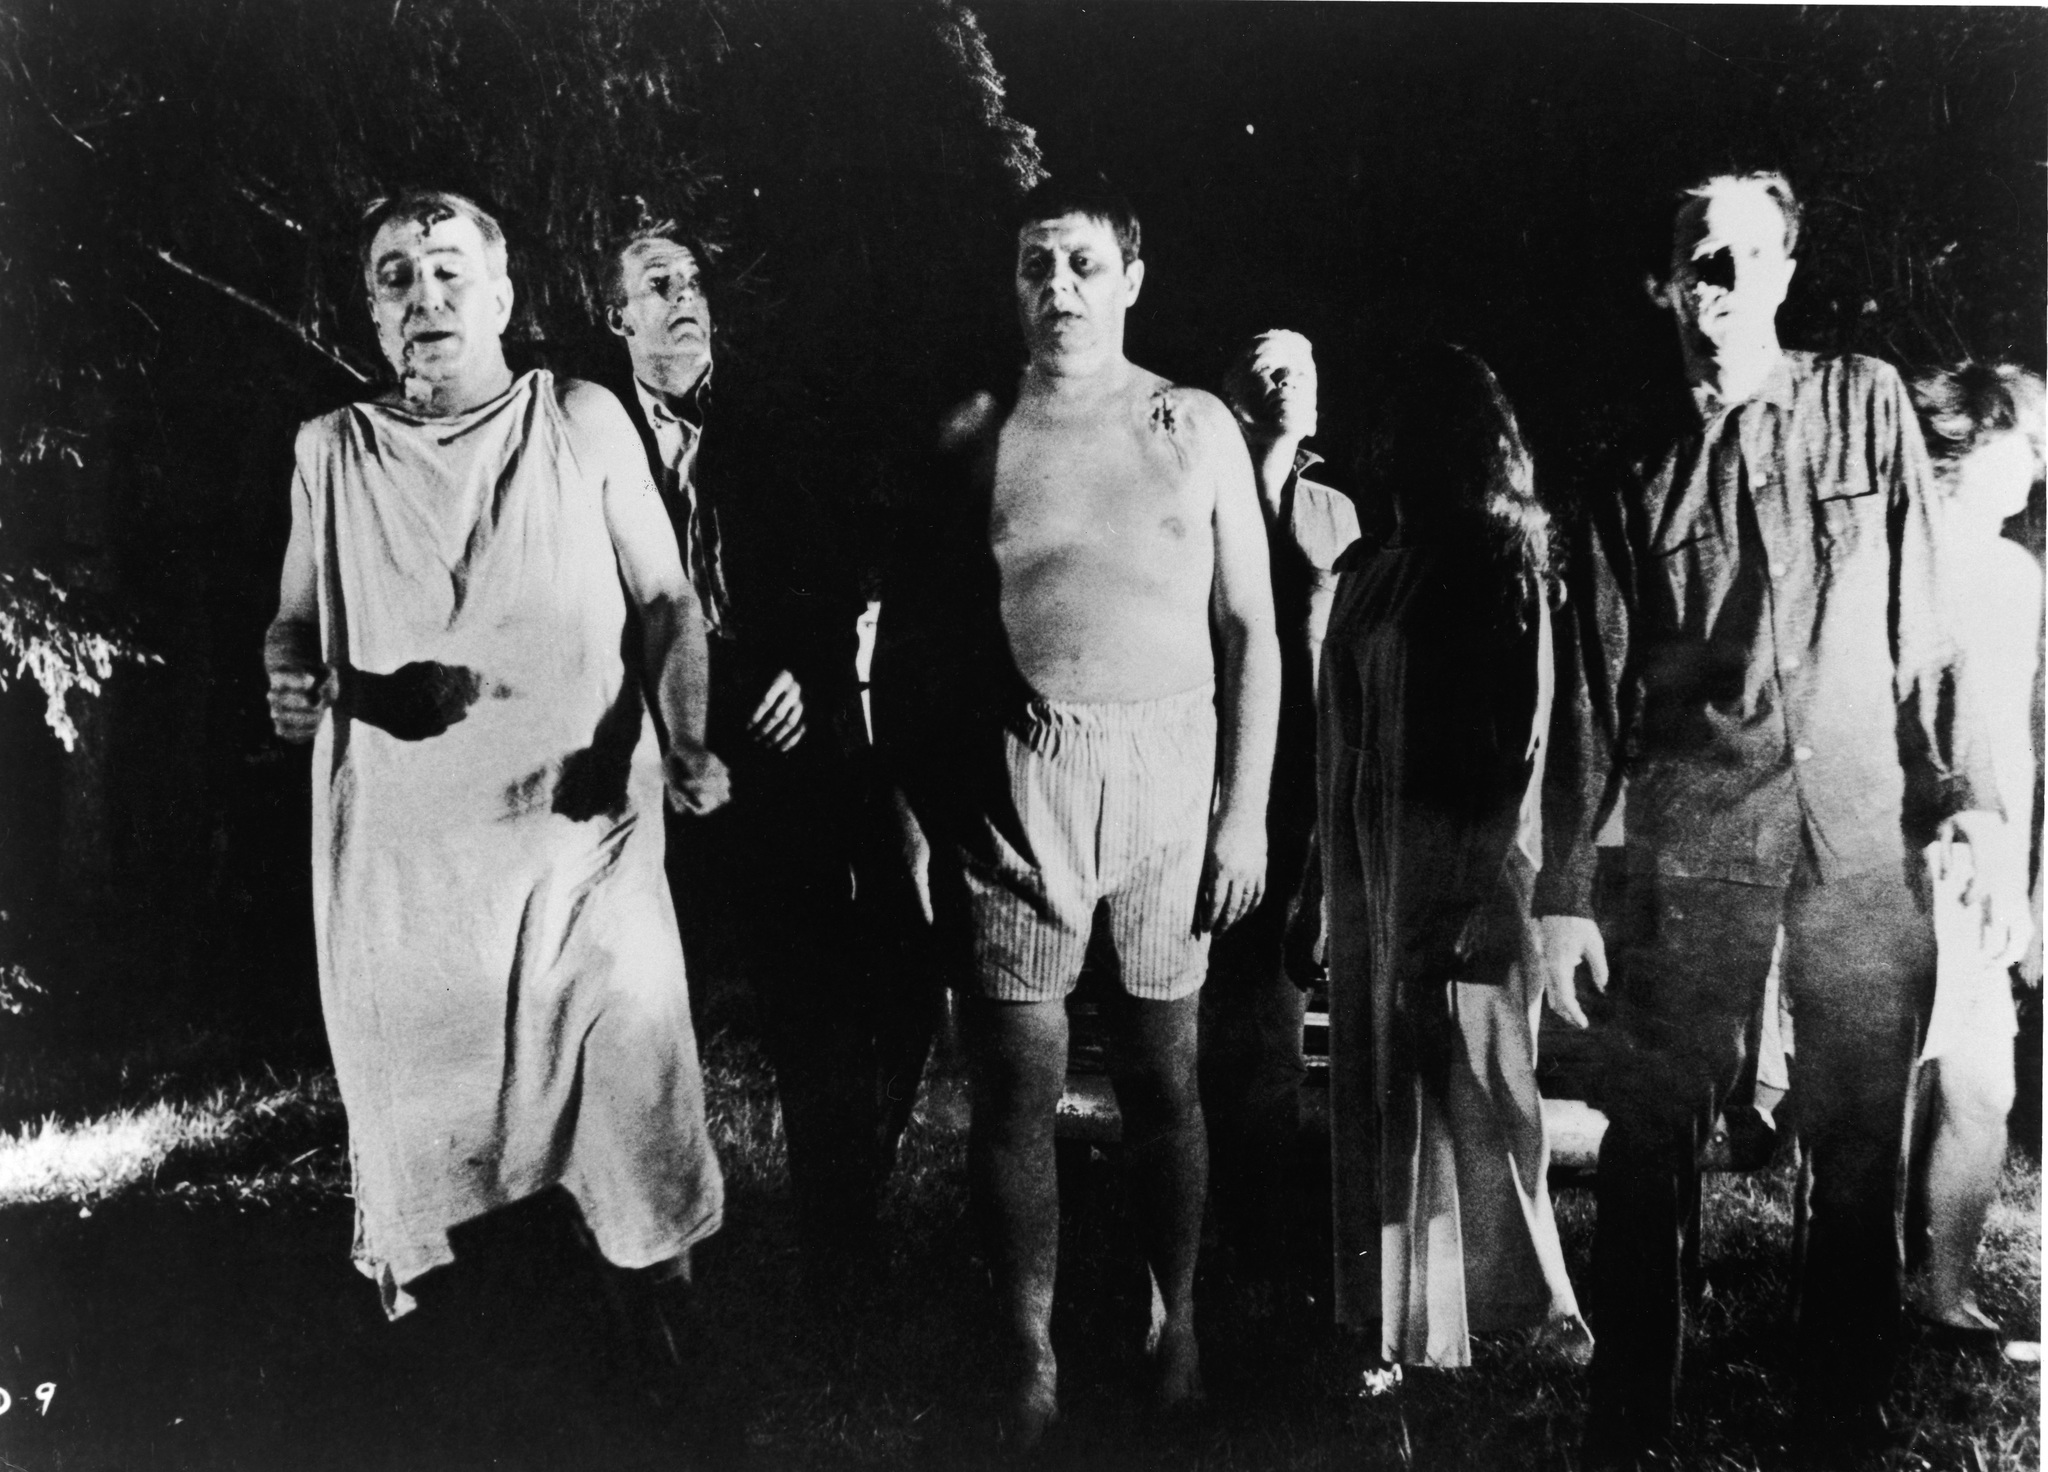 Zombies from "Night of the Living Dead"